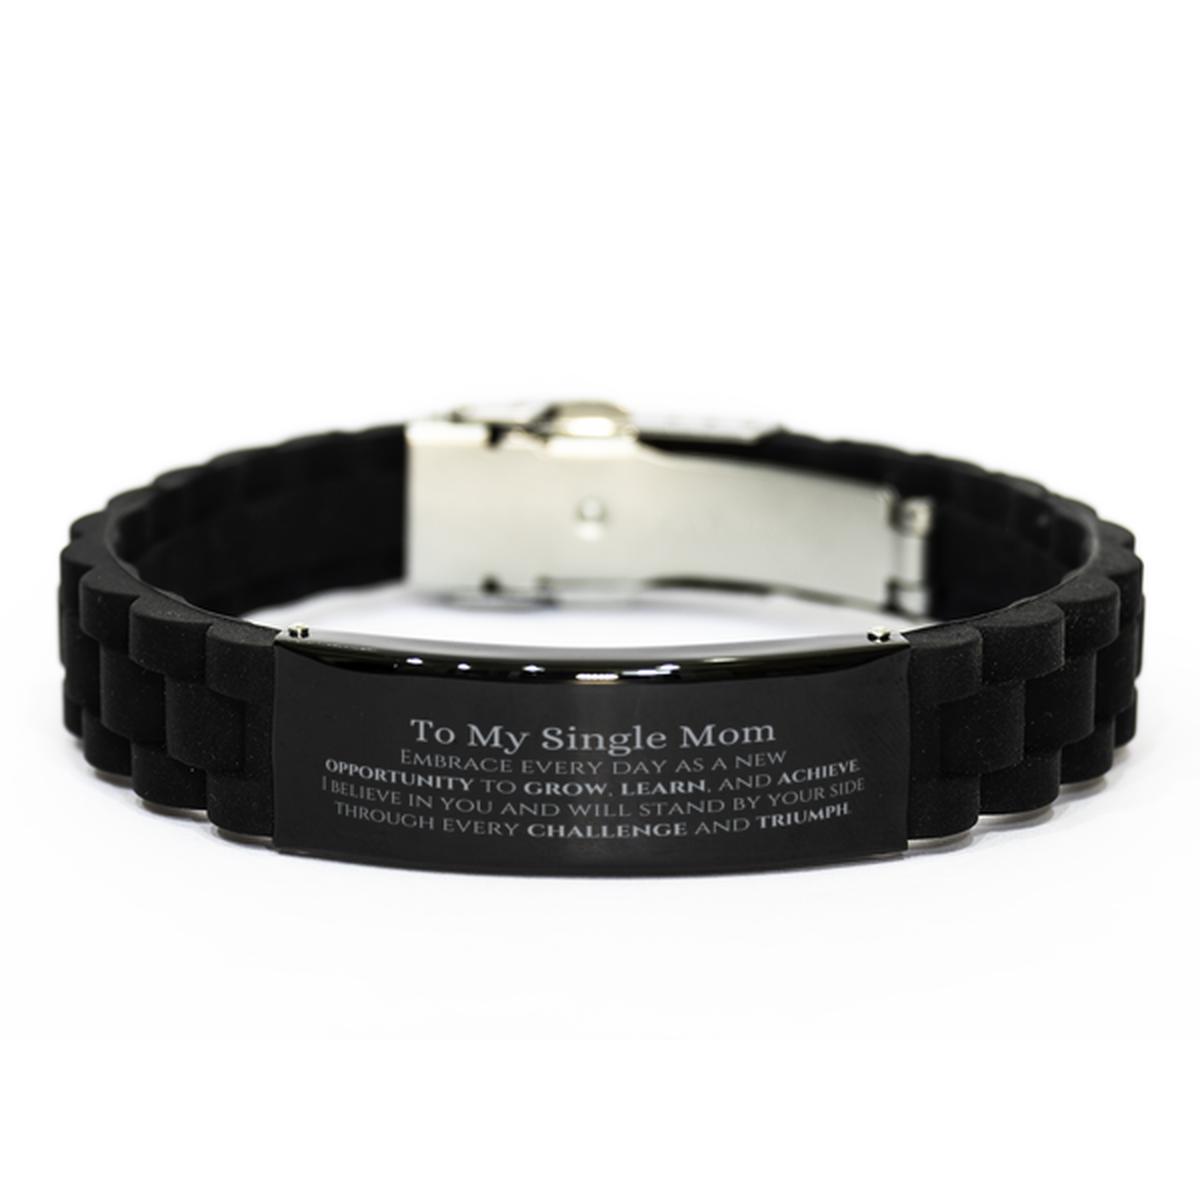 To My Single Mom Gifts, I believe in you and will stand by your side, Inspirational Black Glidelock Clasp Bracelet For Single Mom, Birthday Christmas Motivational Single Mom Gifts